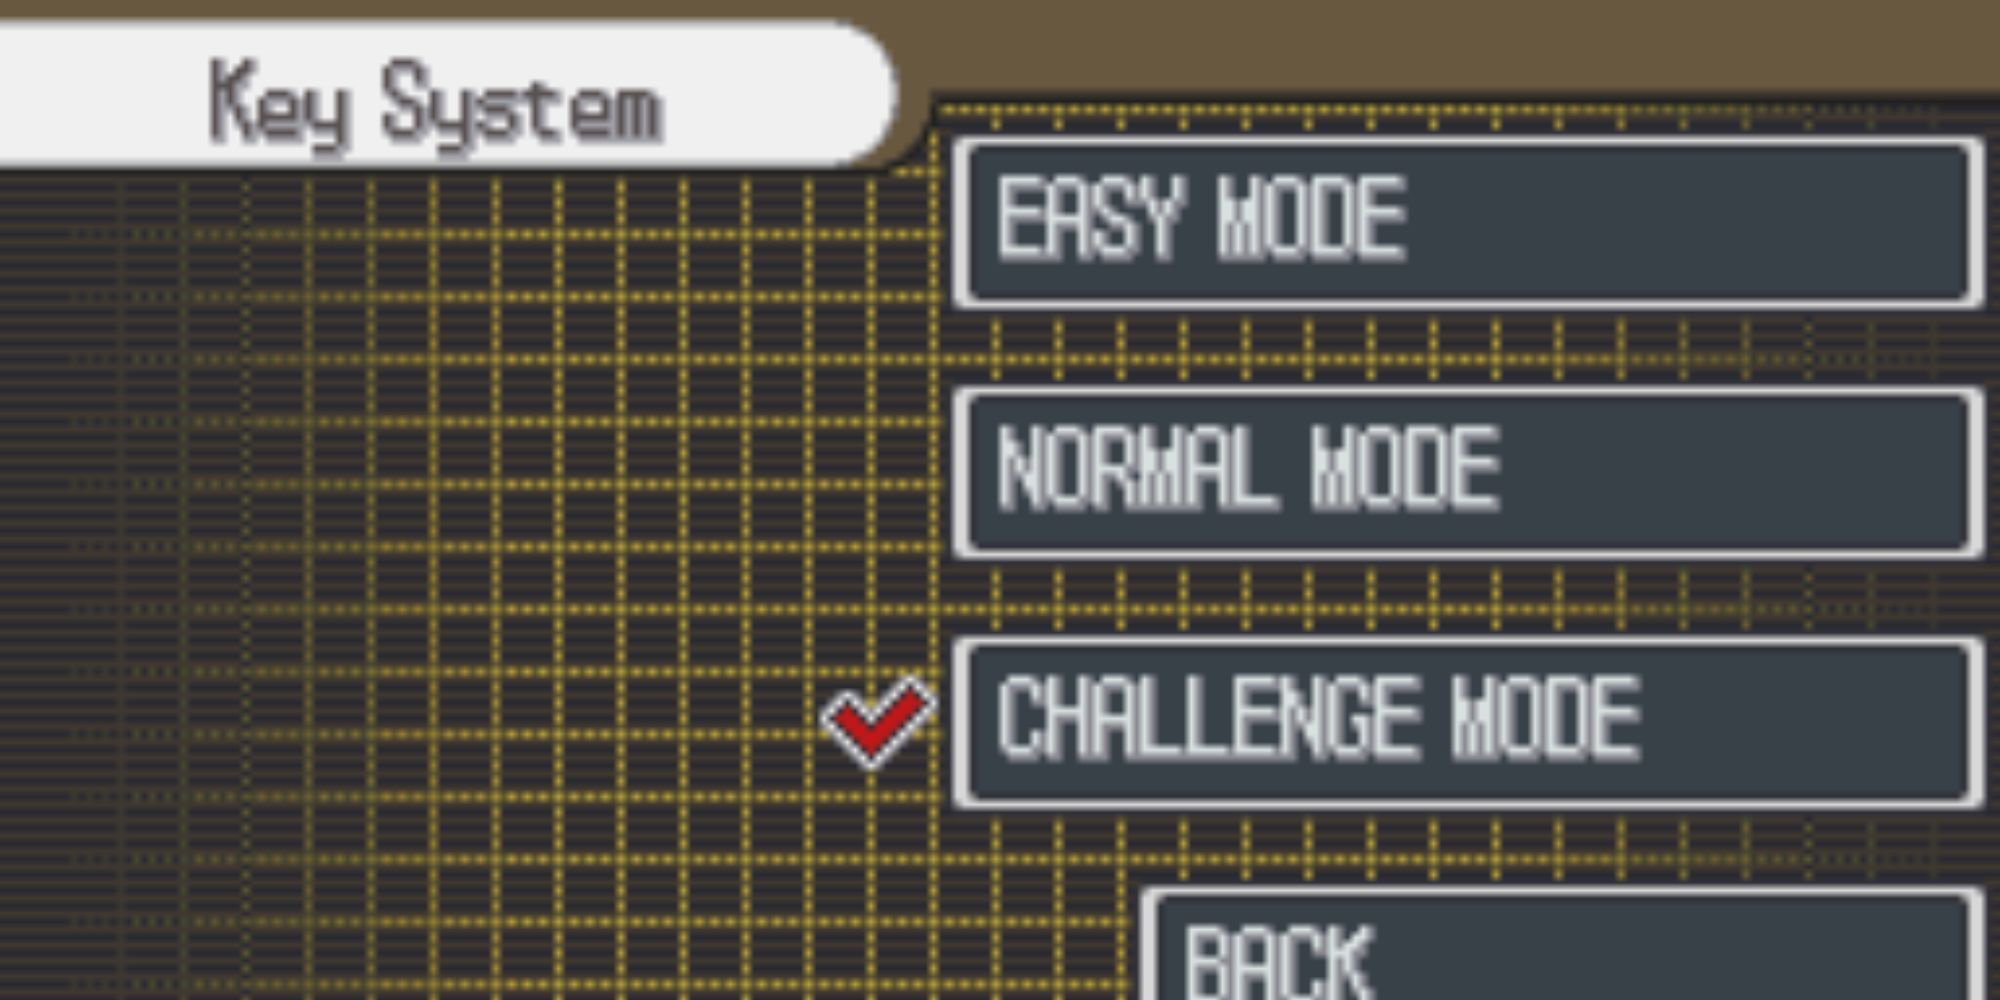 Selecting Easy Mode, Normal Mode or Challenge Mode in the Key System menu.